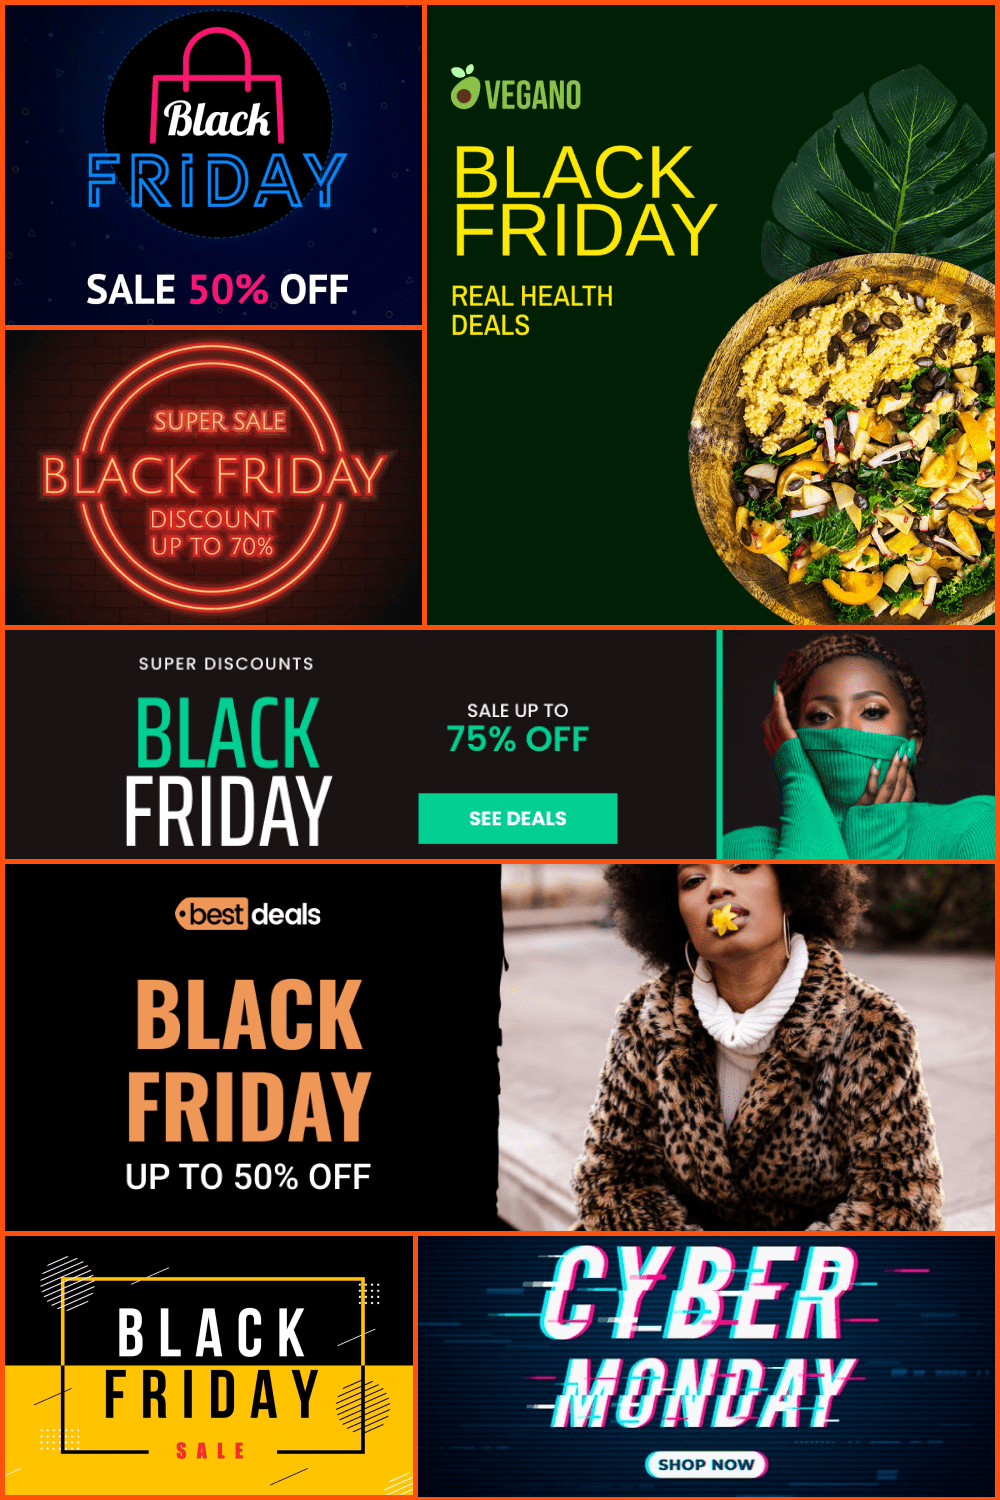 The template contains best Black Friday and Cyber Monday deals for designers, marketers, illustrators.